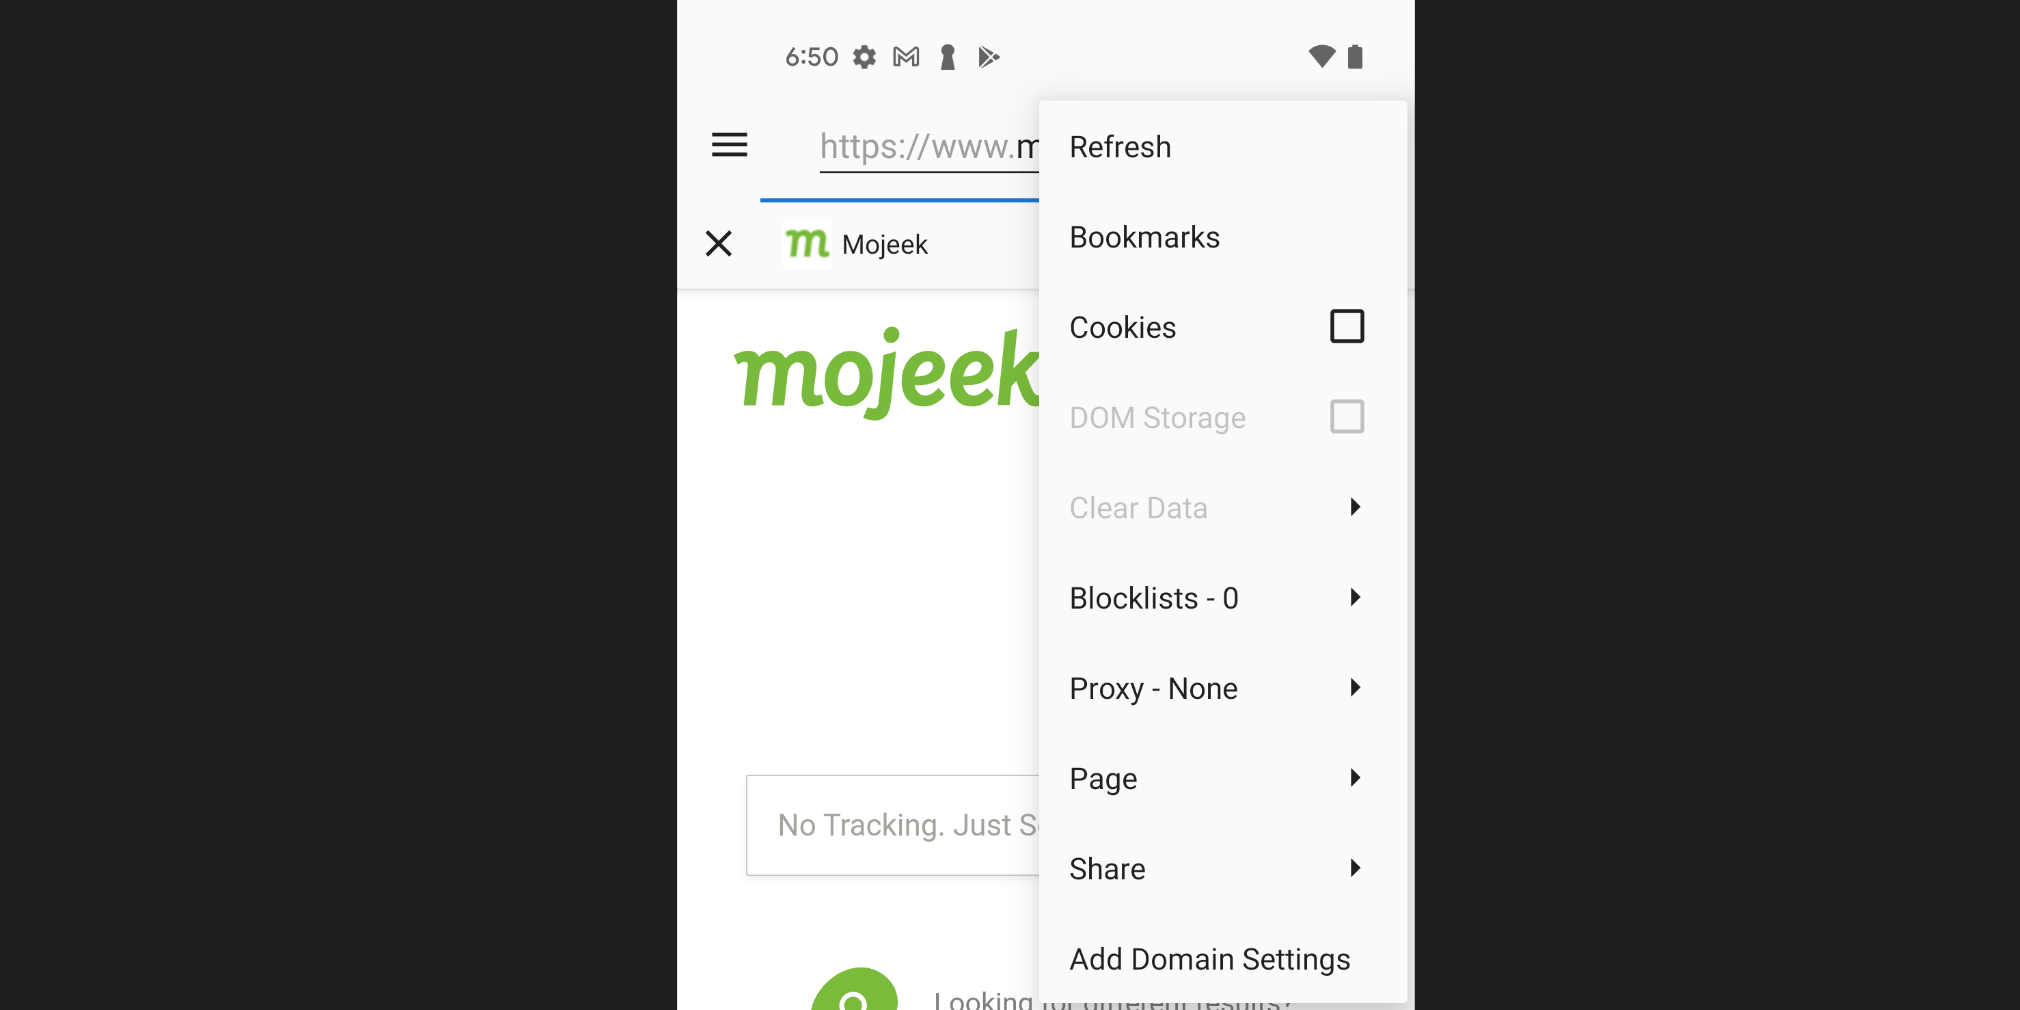 the triple-dot menu showing options such as blocking or unblocking cookies